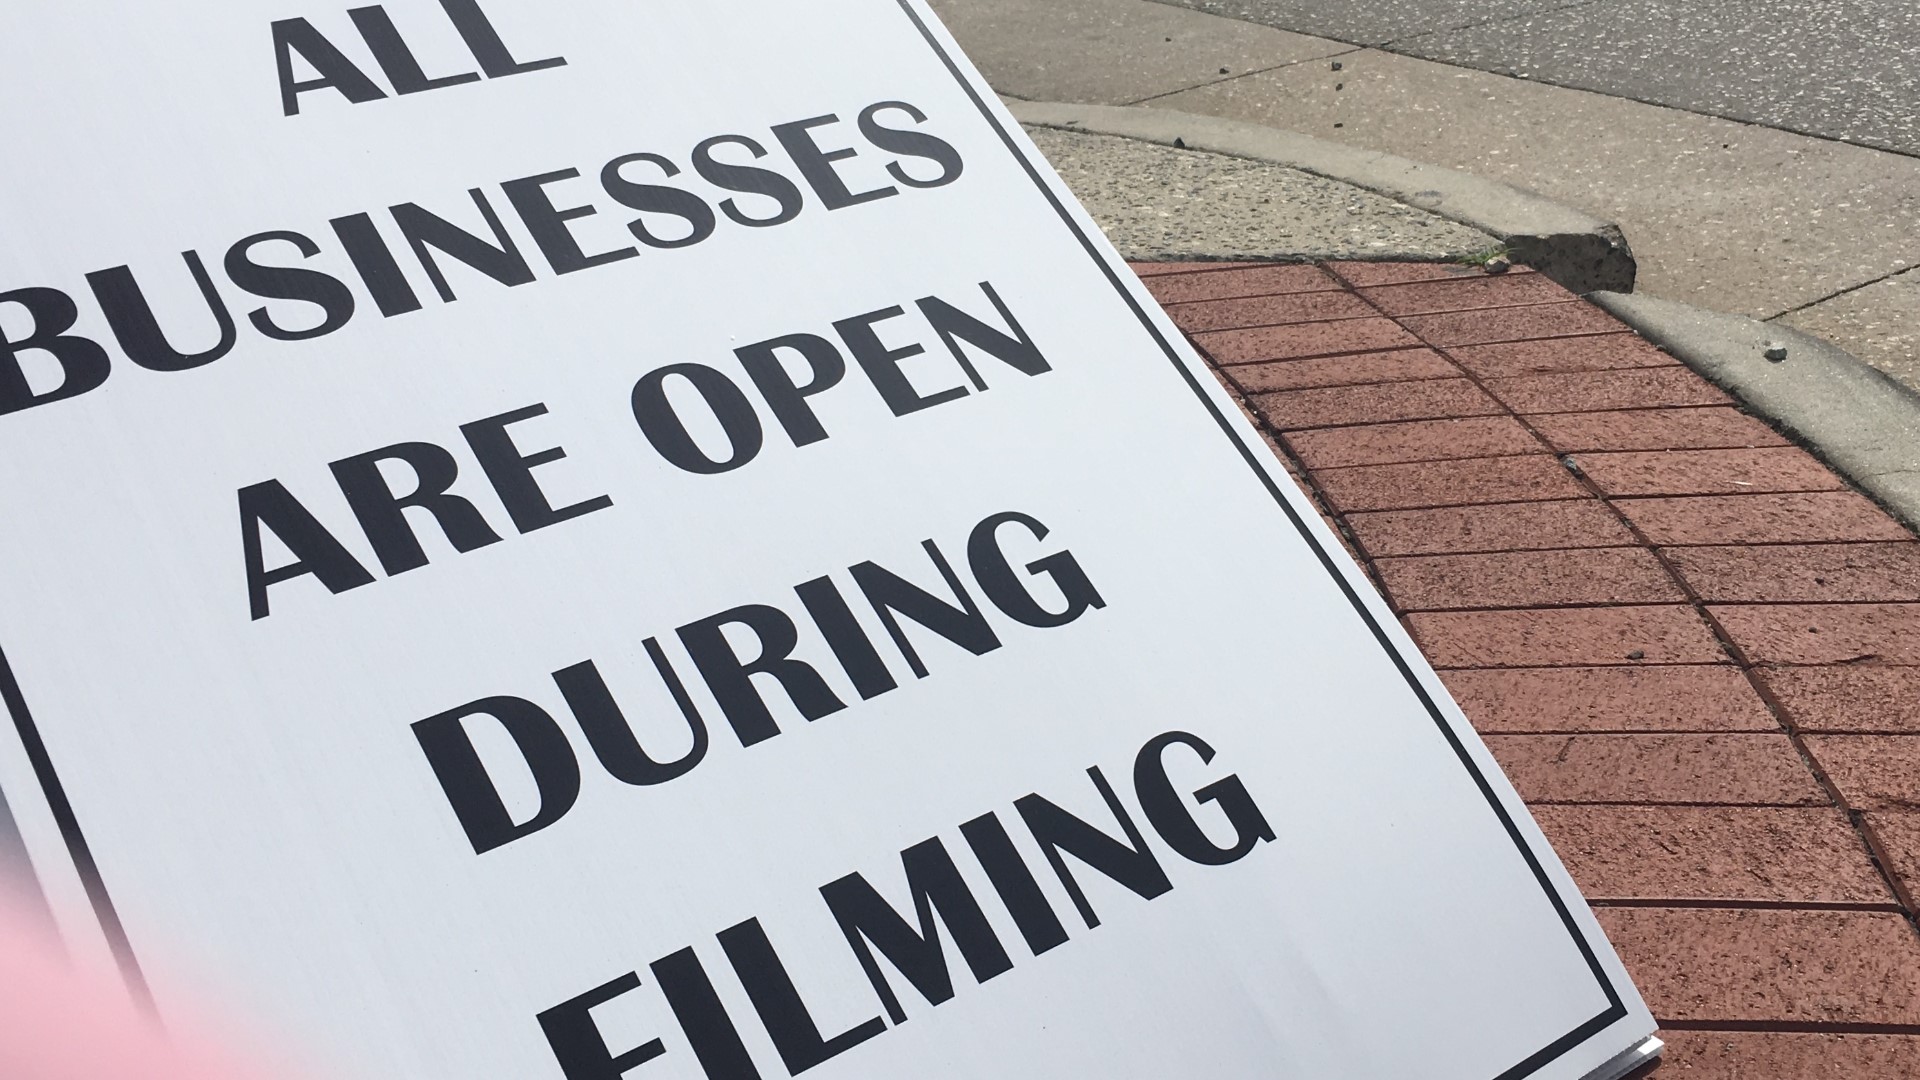 Visit Macon reports that producers of Ron Howard's upcoming movie, "Hillbilly Elegy," spent more than $1 million in Bibb County last month.